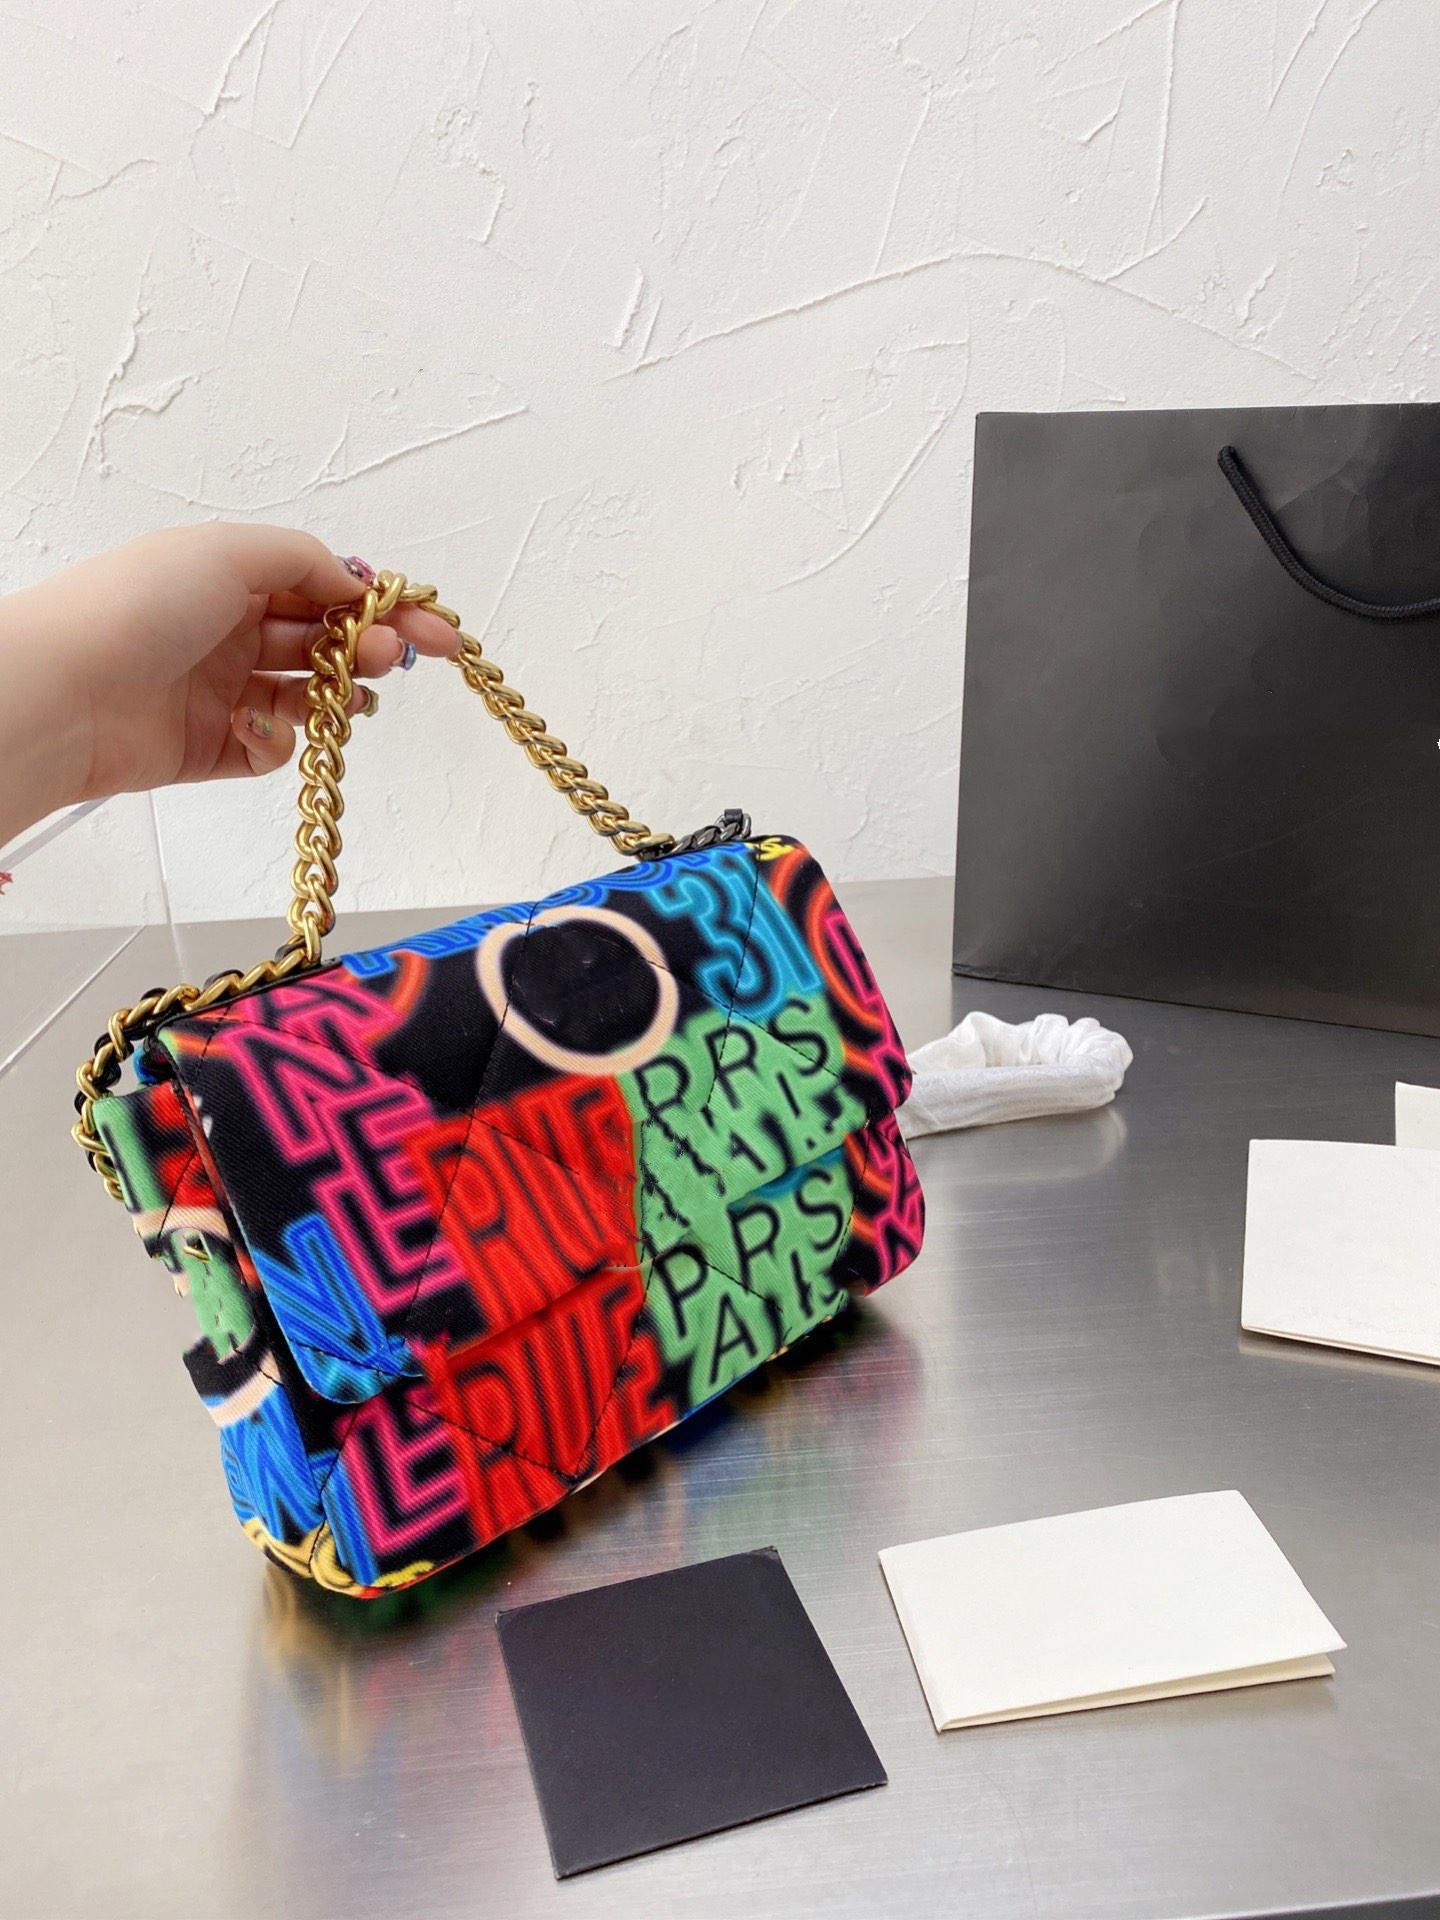 

2021 High-end Flap bag summer season color cloth fluorescent Overall modelling continuation of the classic elements and more particularly, Make up the difference